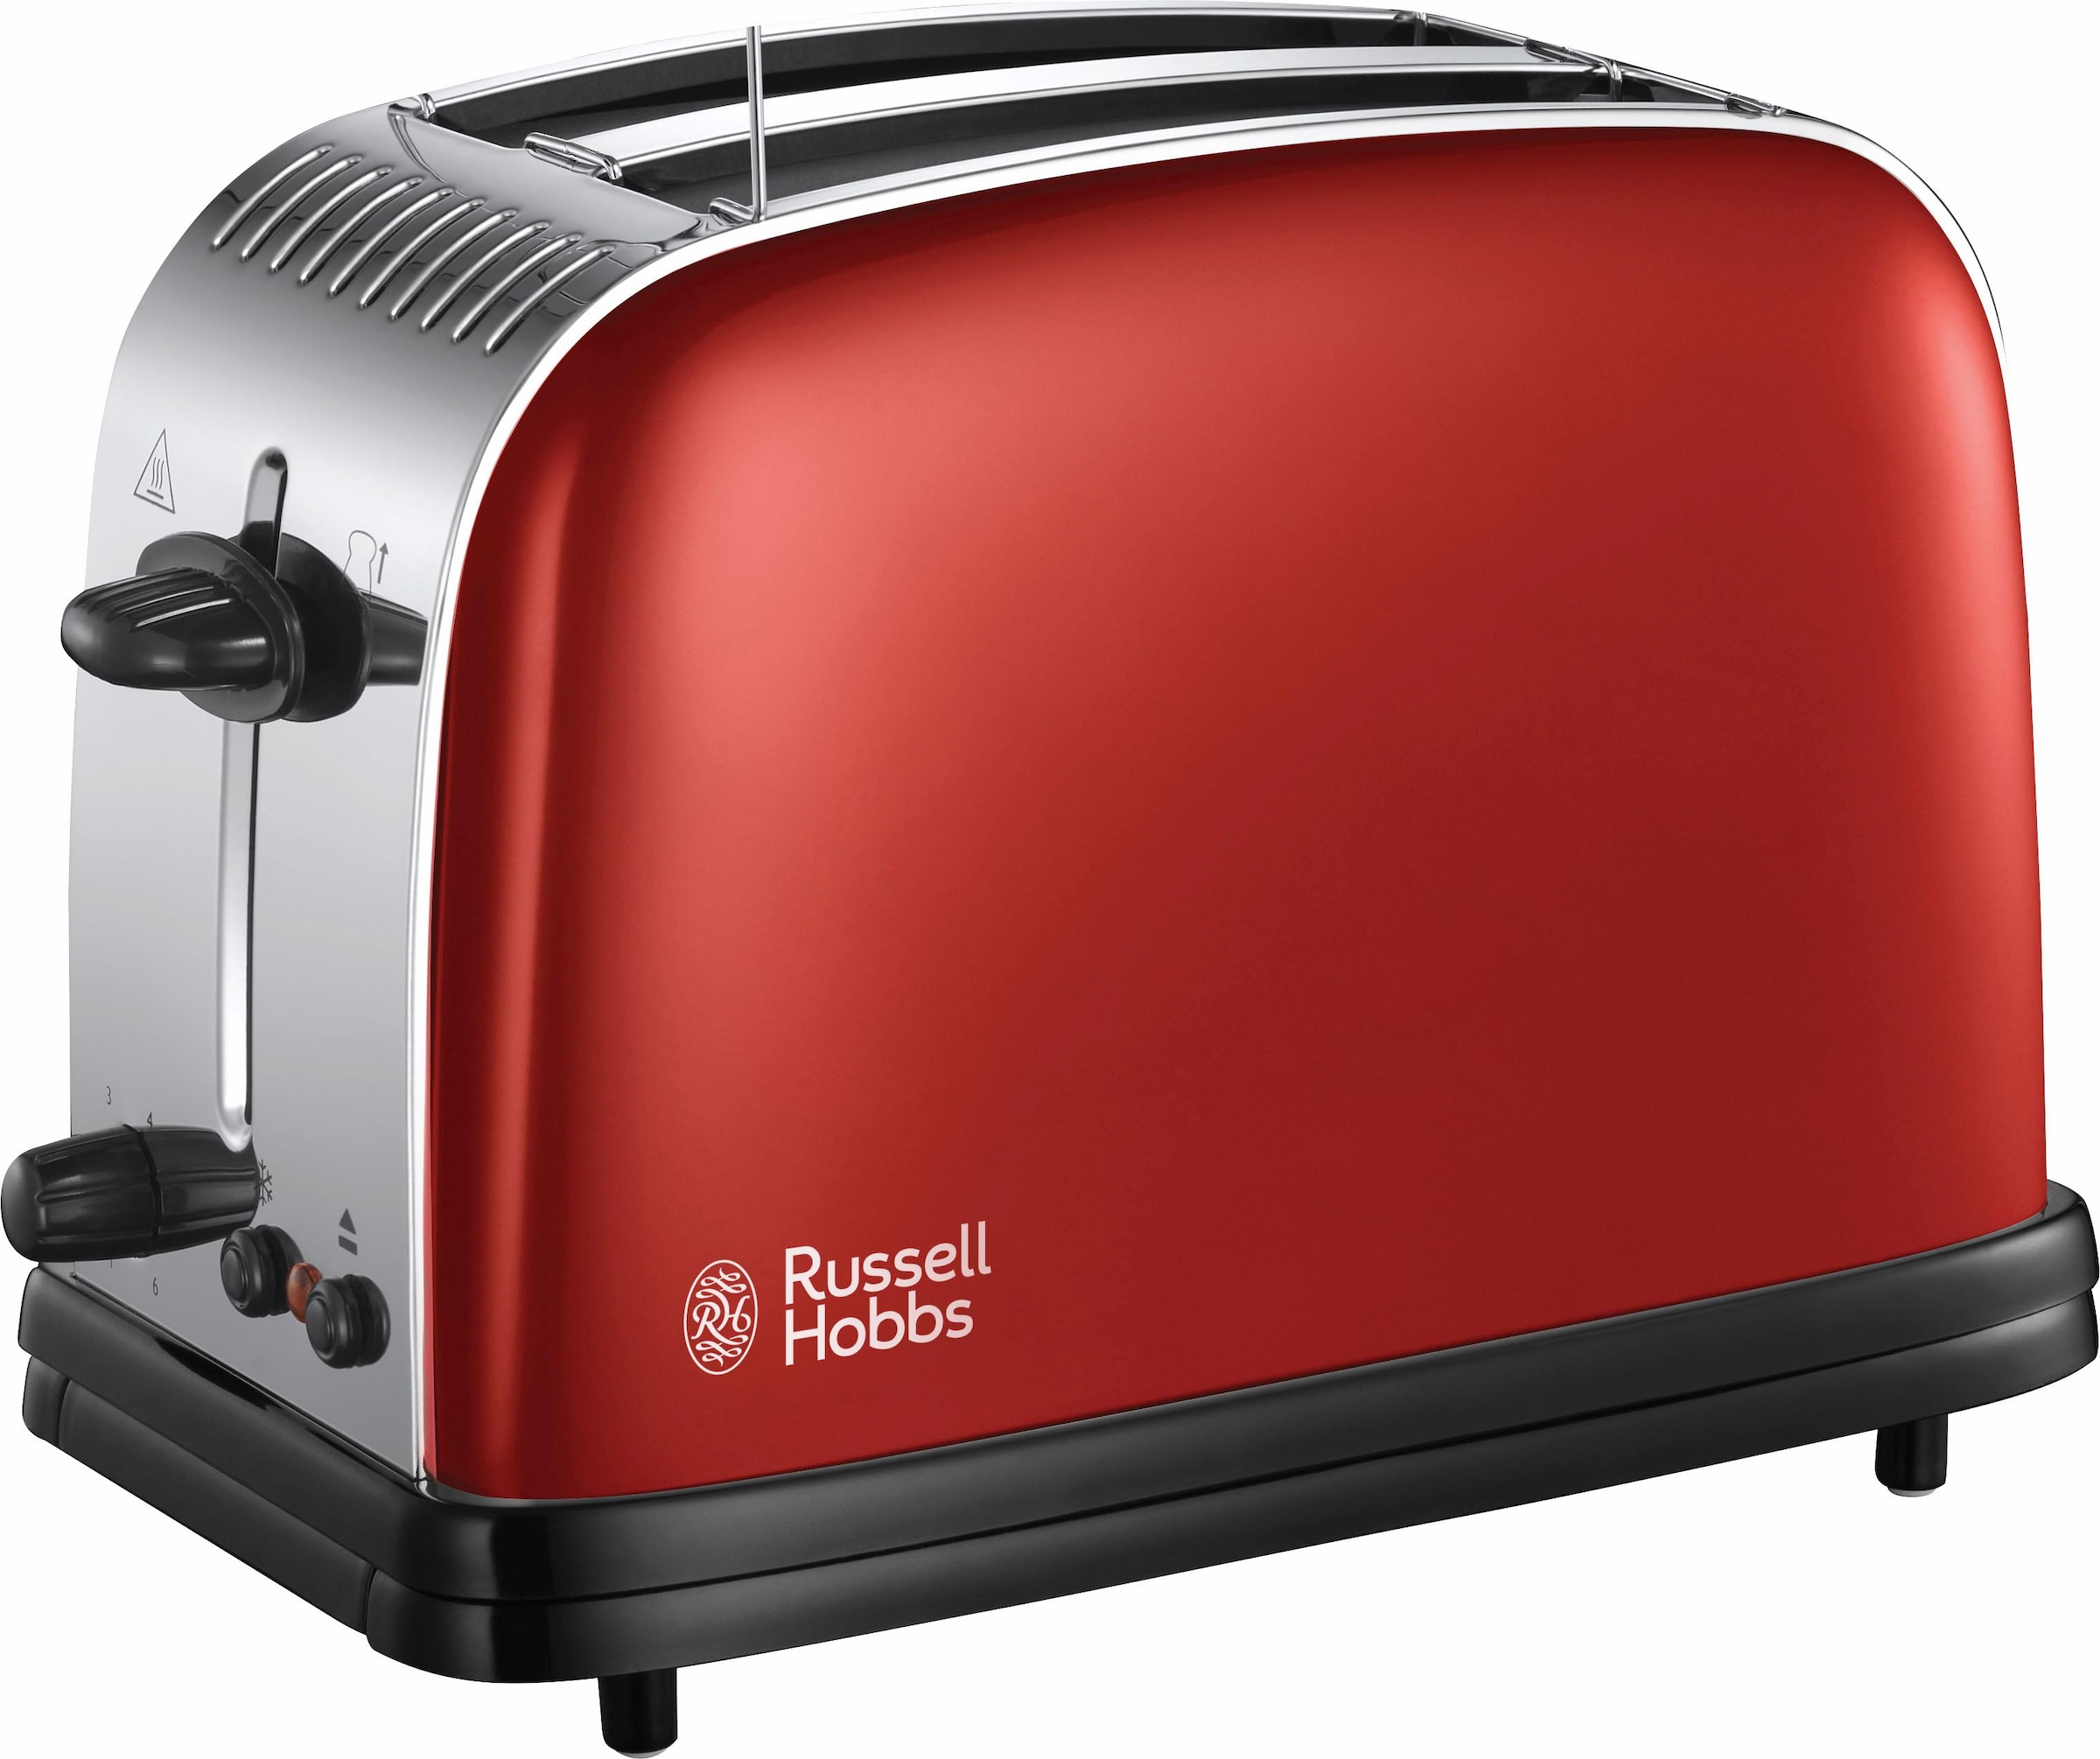 RUSSELL HOBBS Toaster »Colours Plus+ Flame Red 23330...